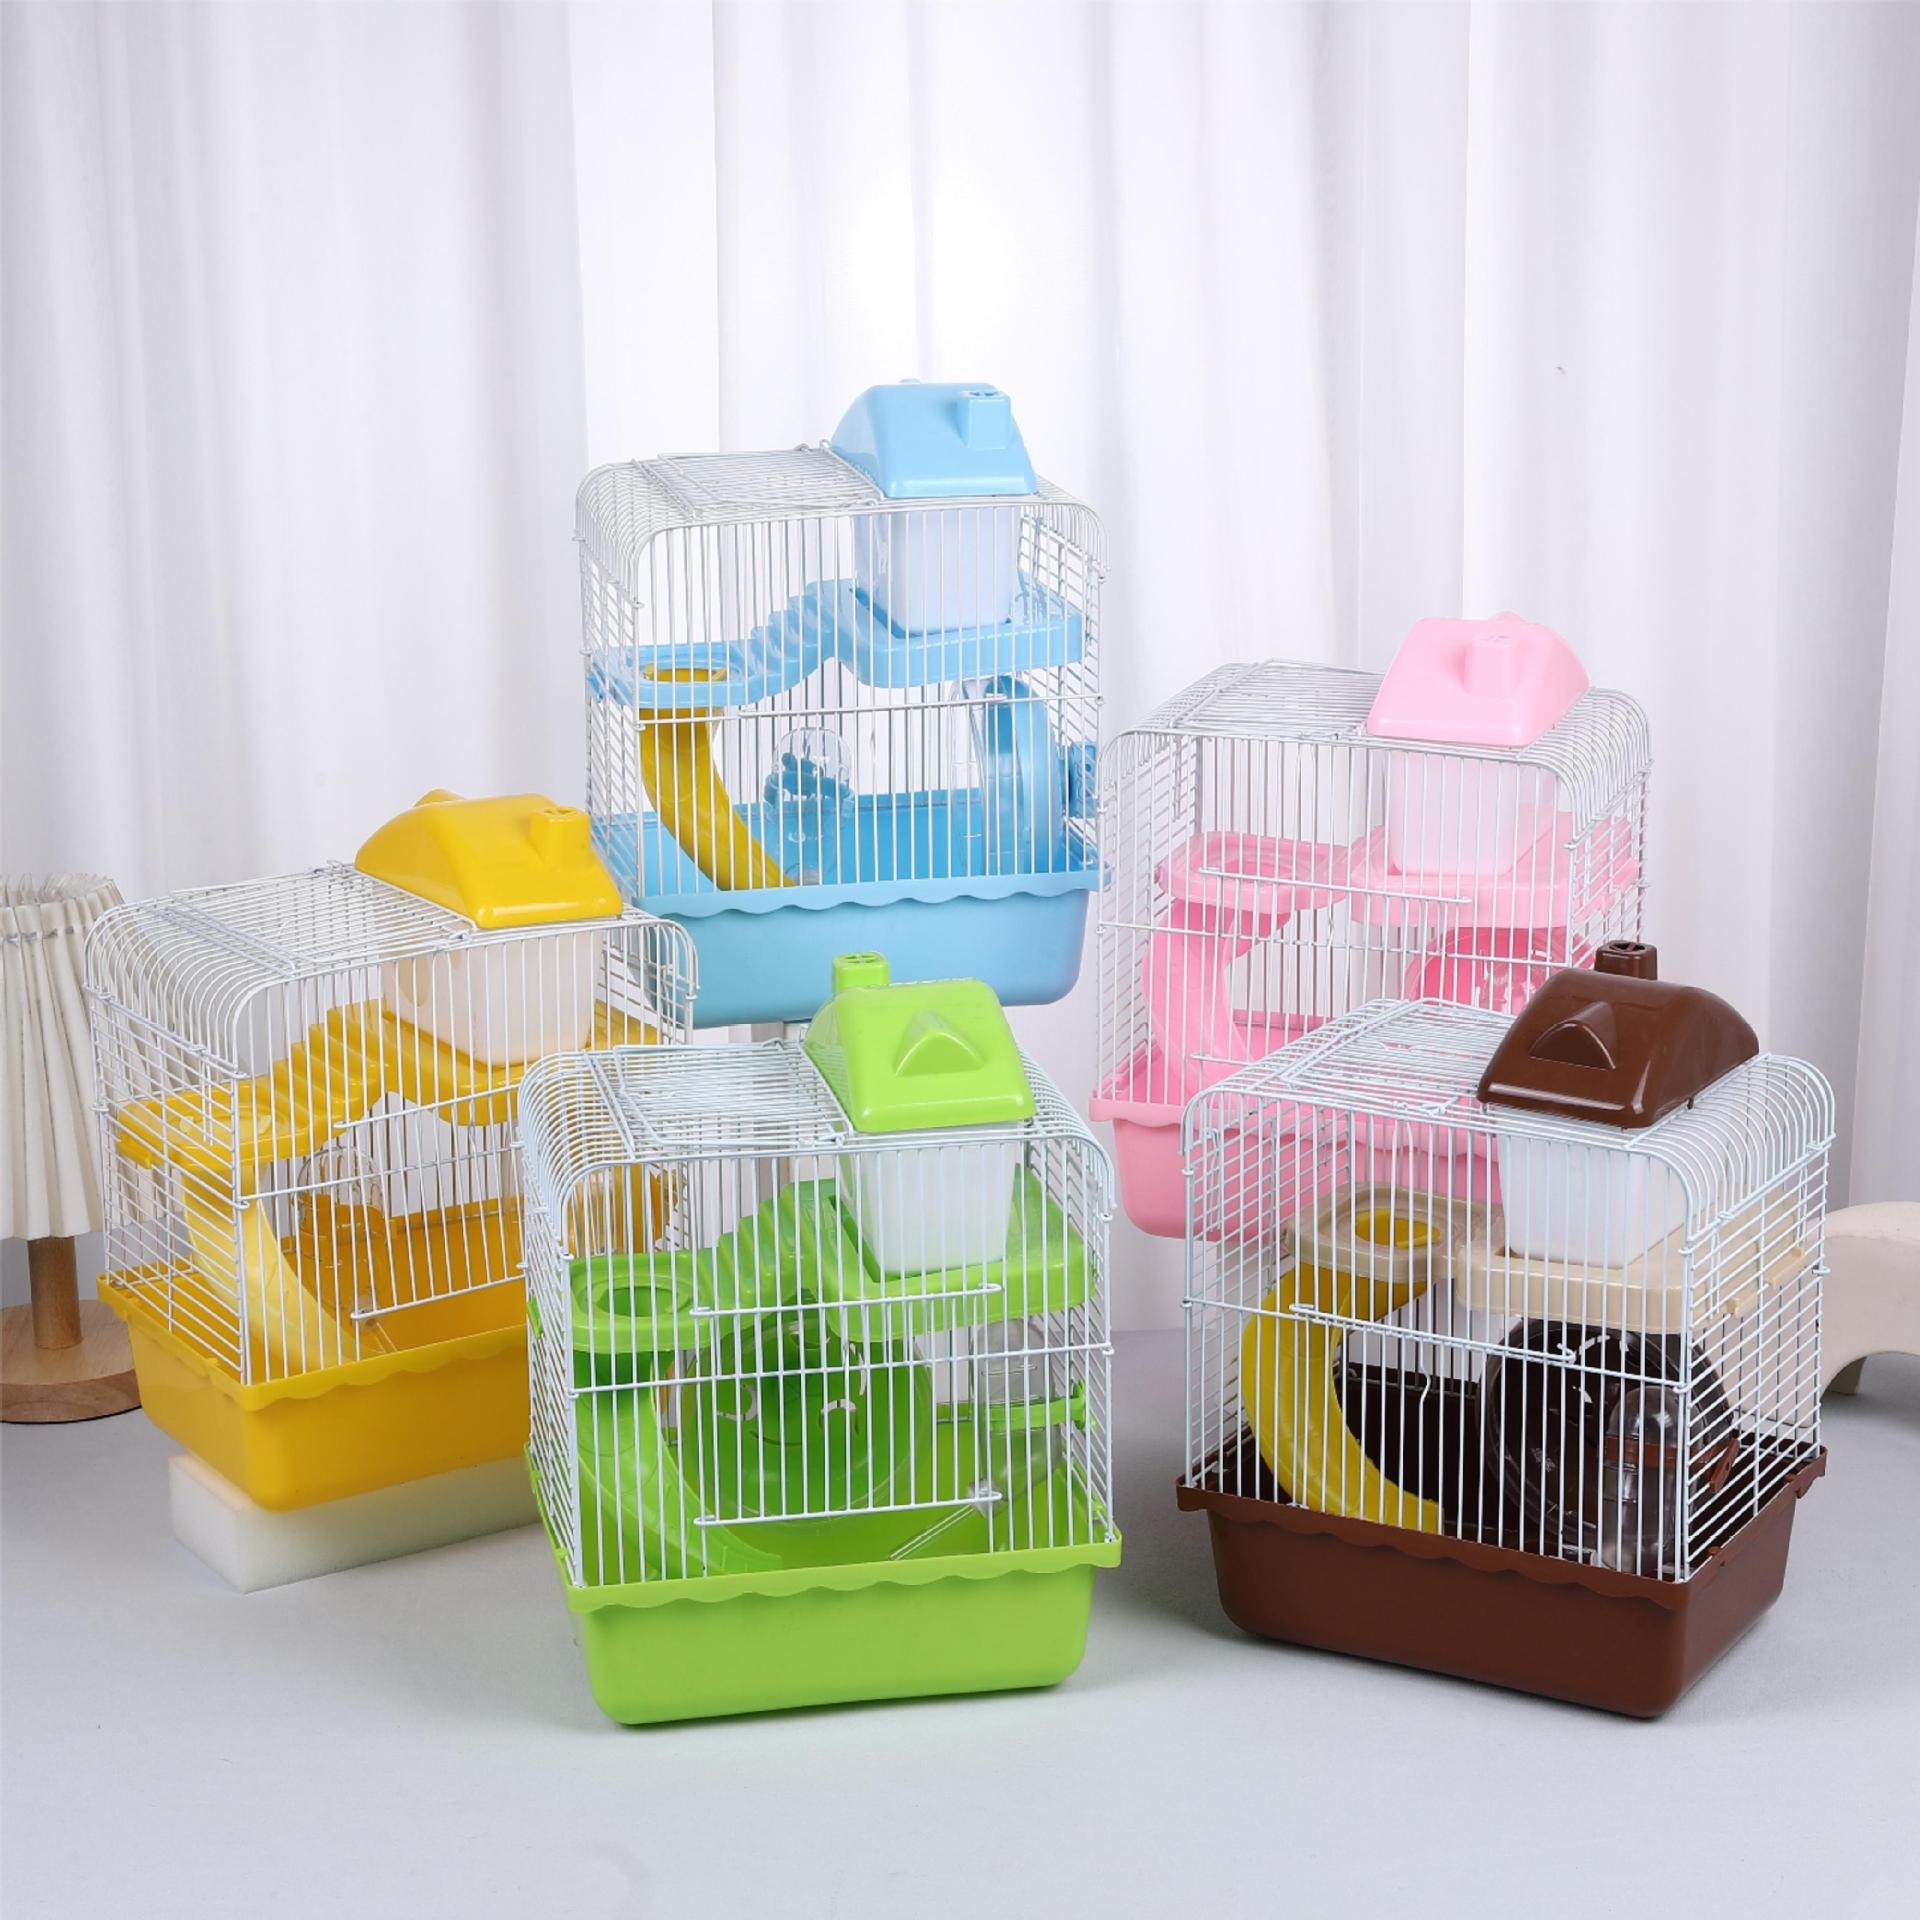 Factory Wholesale Hamster Cage Small Pastoral Castelet Hamster Supplies Portable Outerwear Double-Layer Anti-Escape Warehouse Rat's Nest